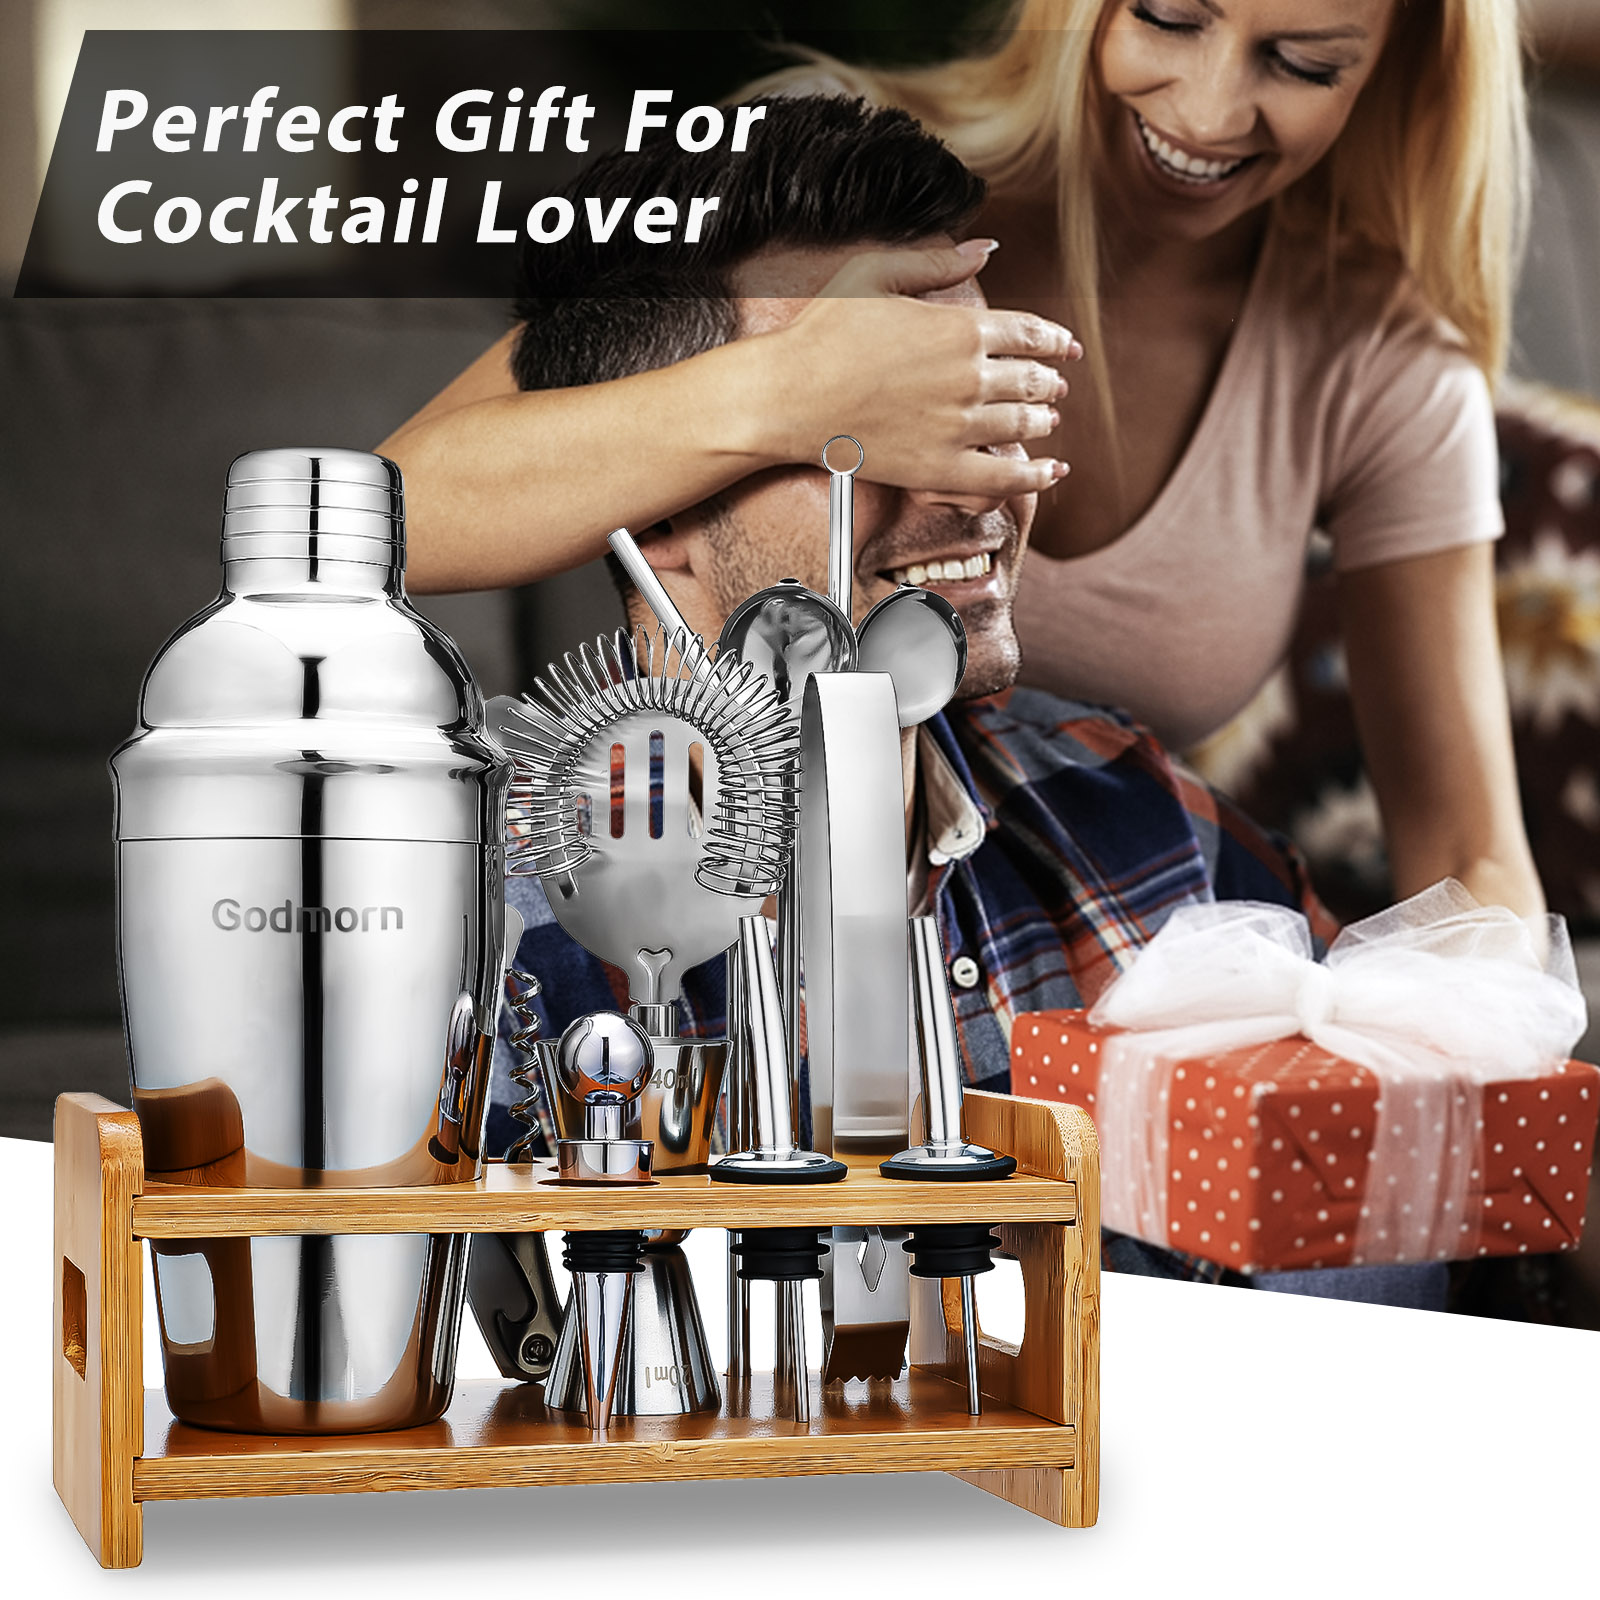 Cocktail-Set-Godmorn-Stainless-Steel-Cocktail-Shaker-Set-14-Piece-with-Better-Bamboo-Stand-1304971-11